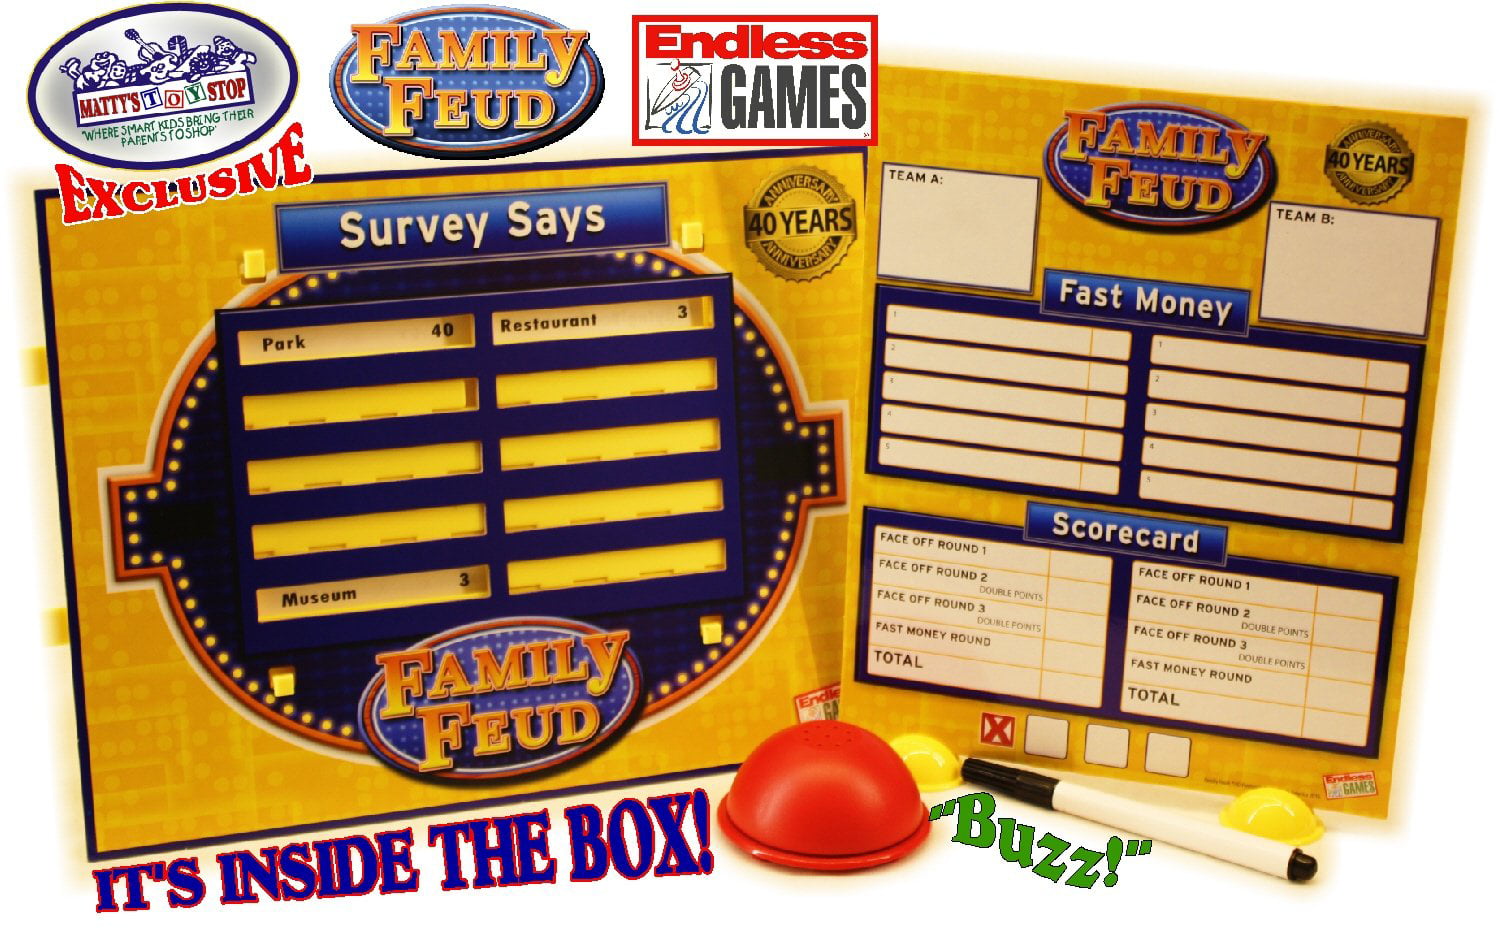 Endless Games Family Feud 40th Anniversary Edition Game for sale online 